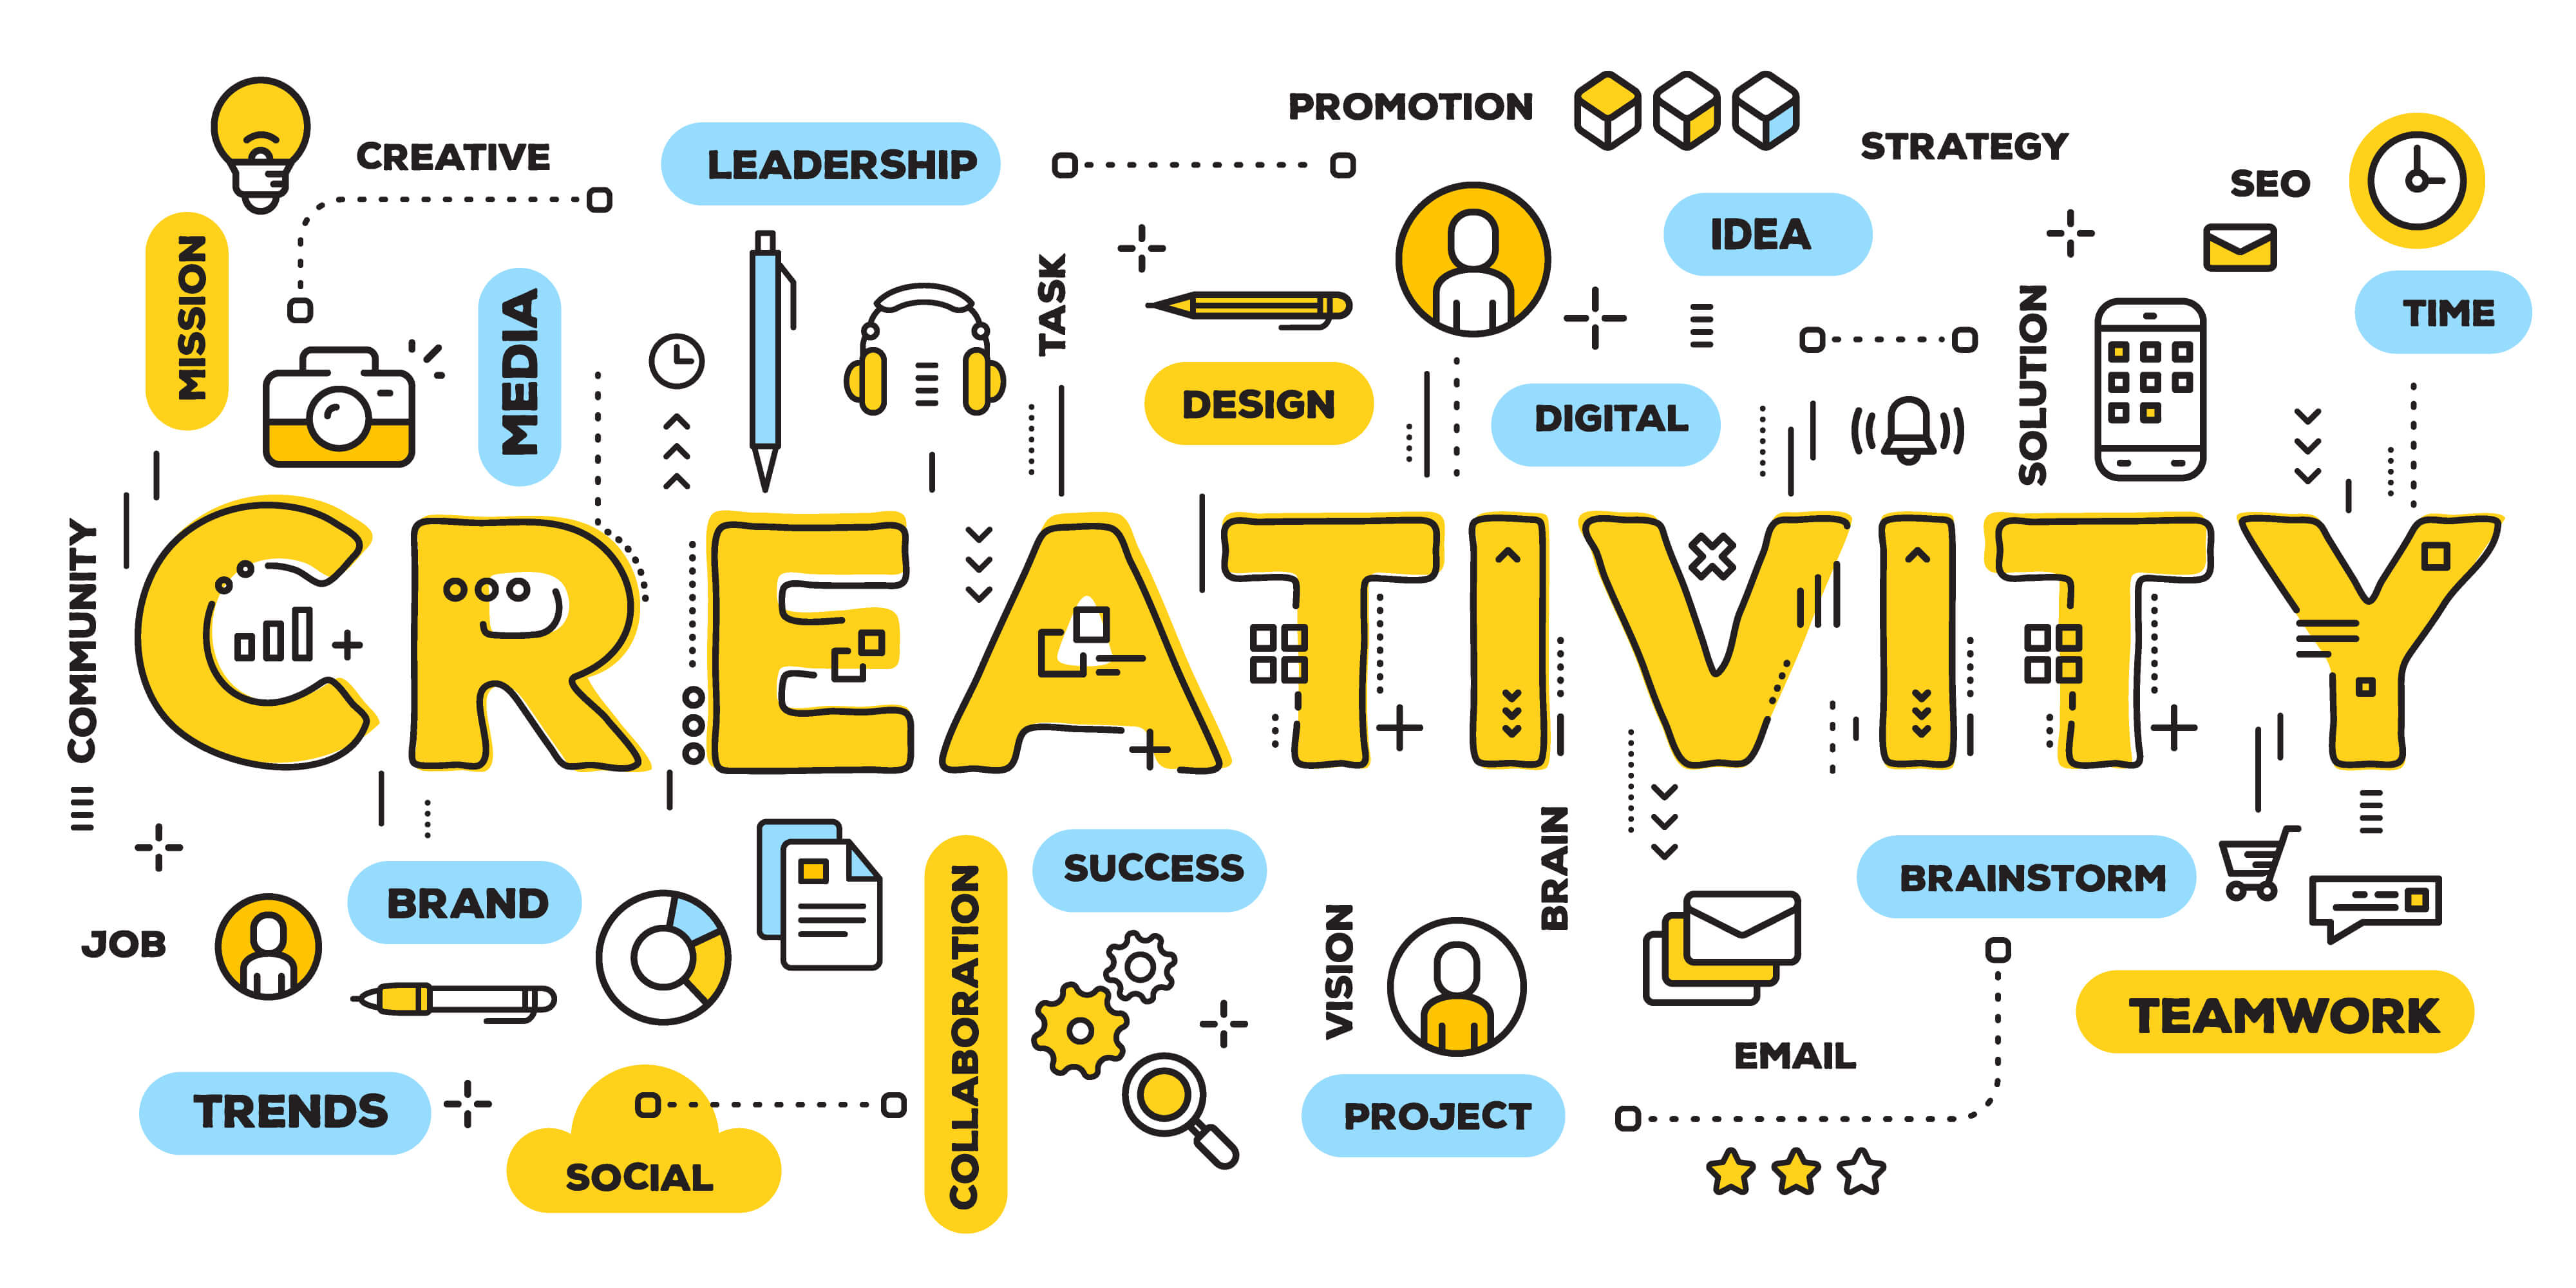 What’s the Big Deal About Creativity?